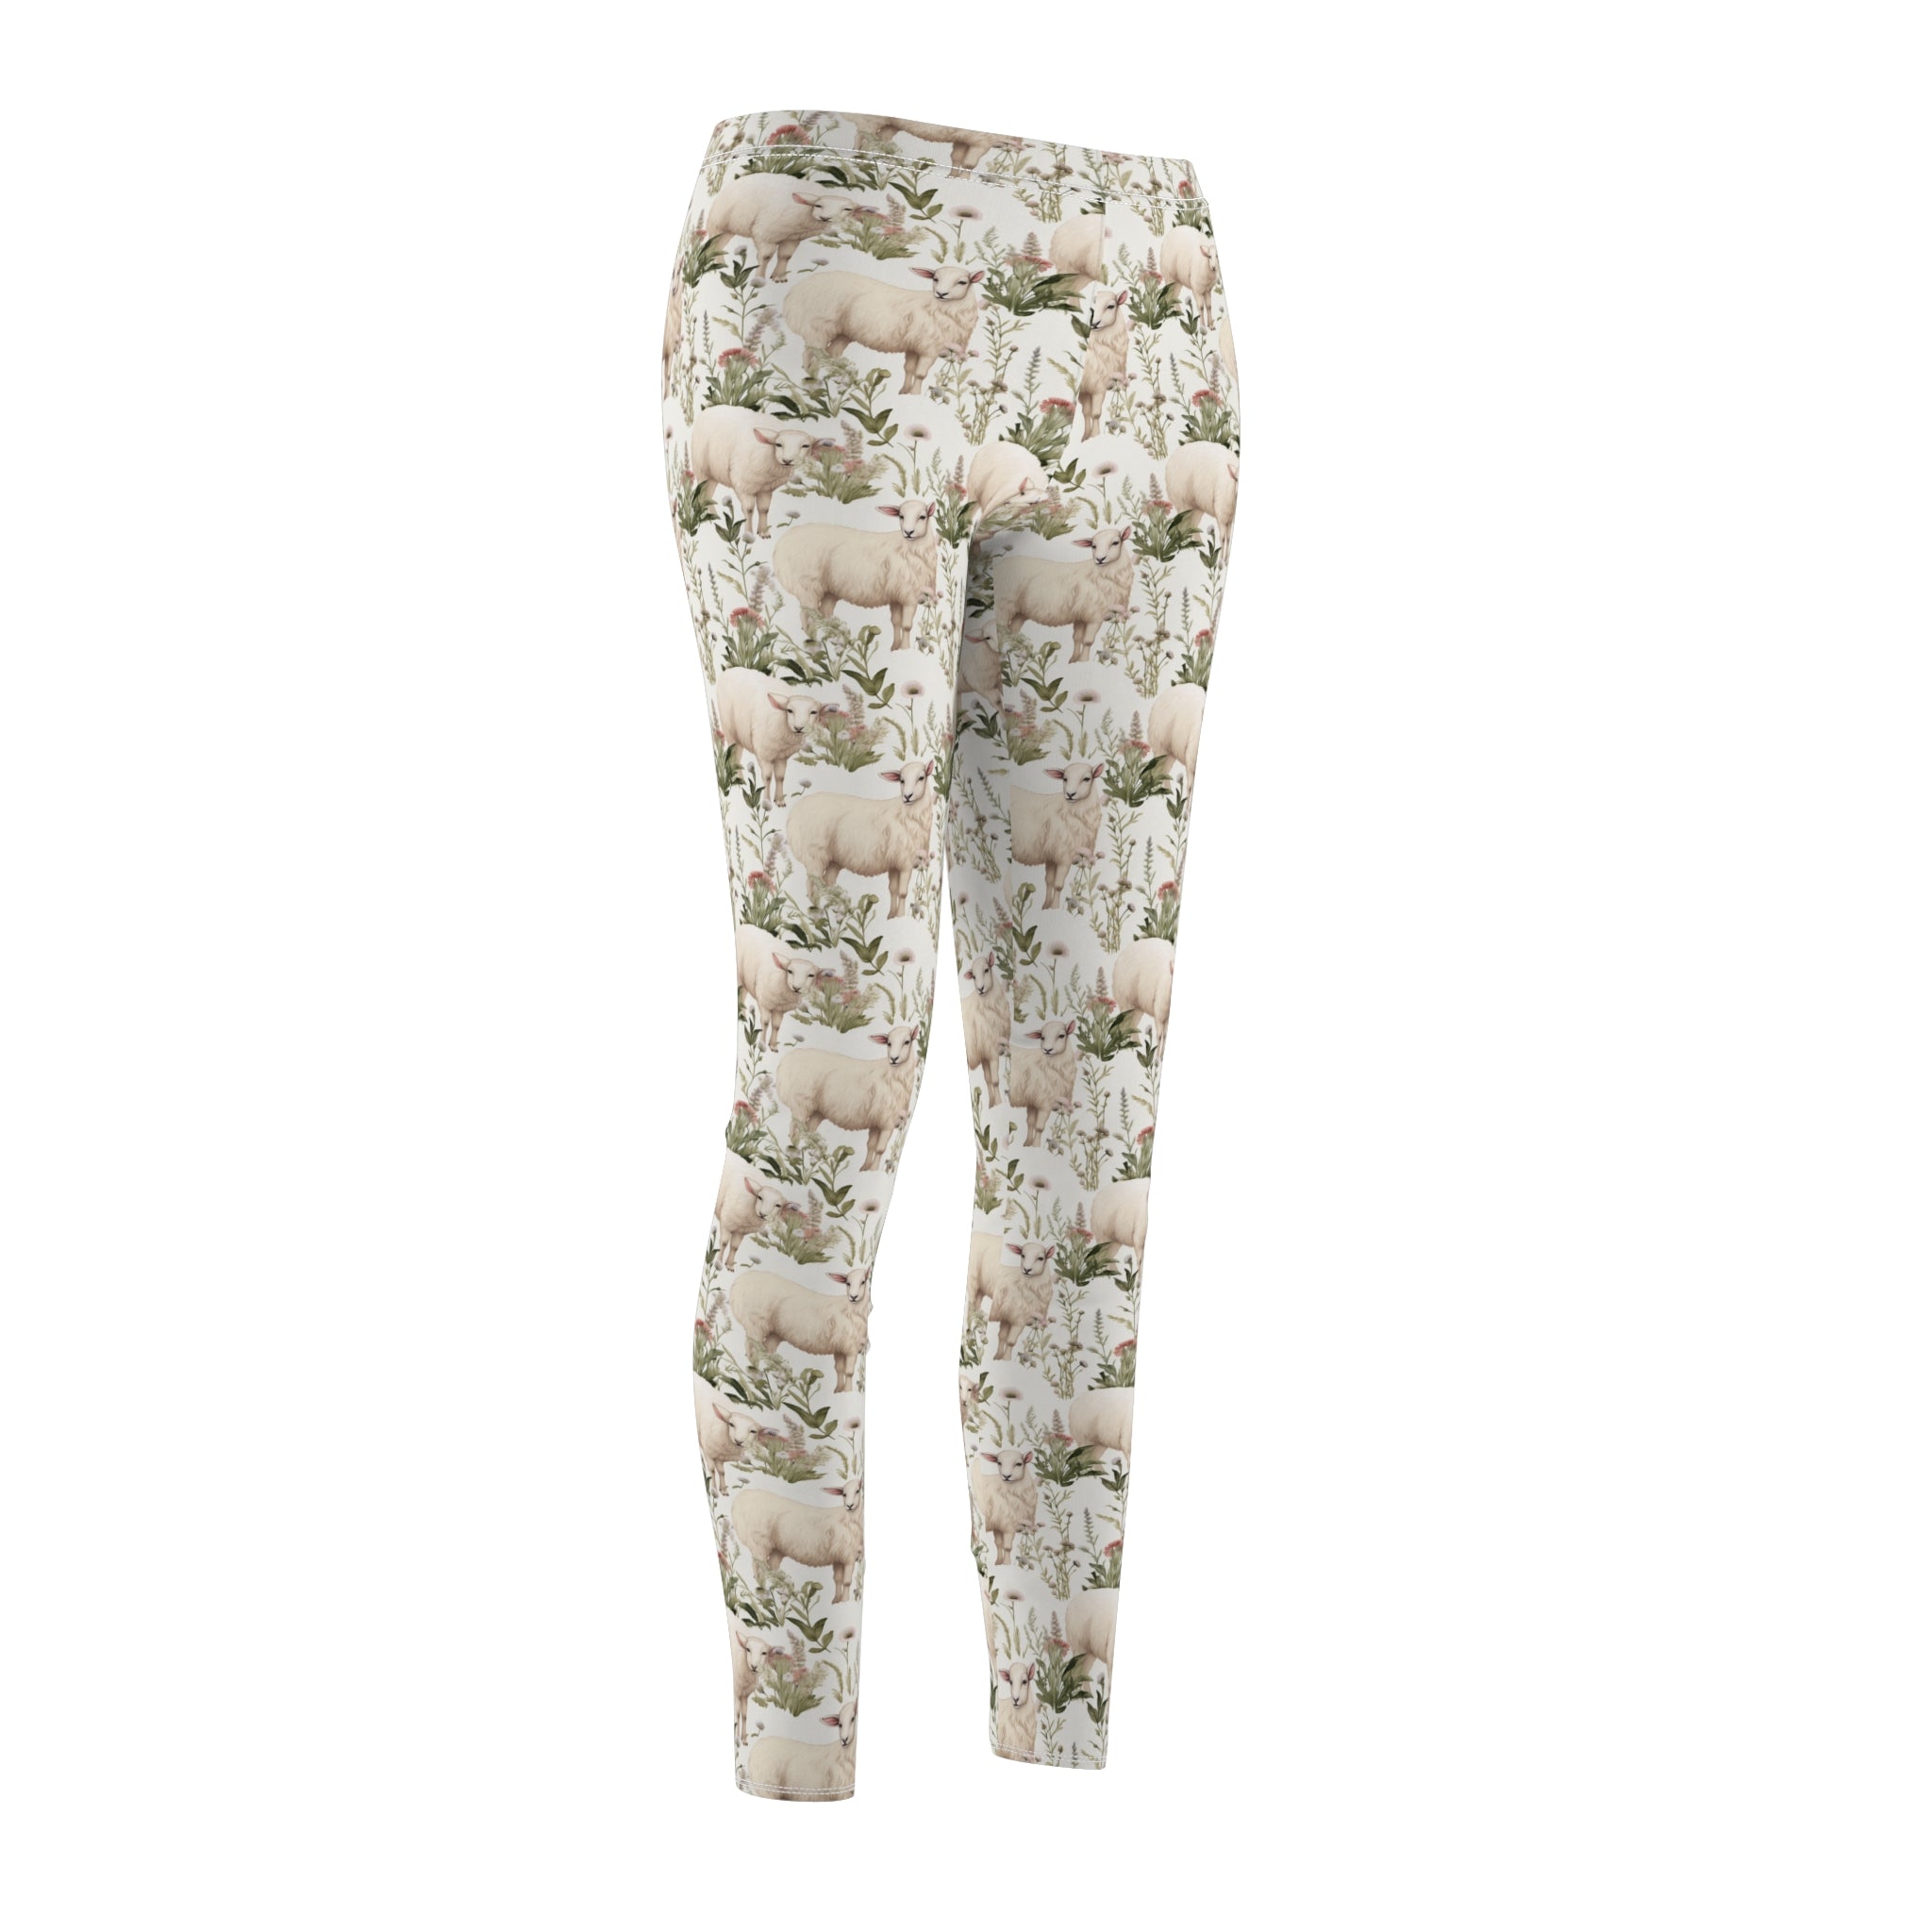 Rustic Floral Sheep Gym Leggings - Country Style Fitness